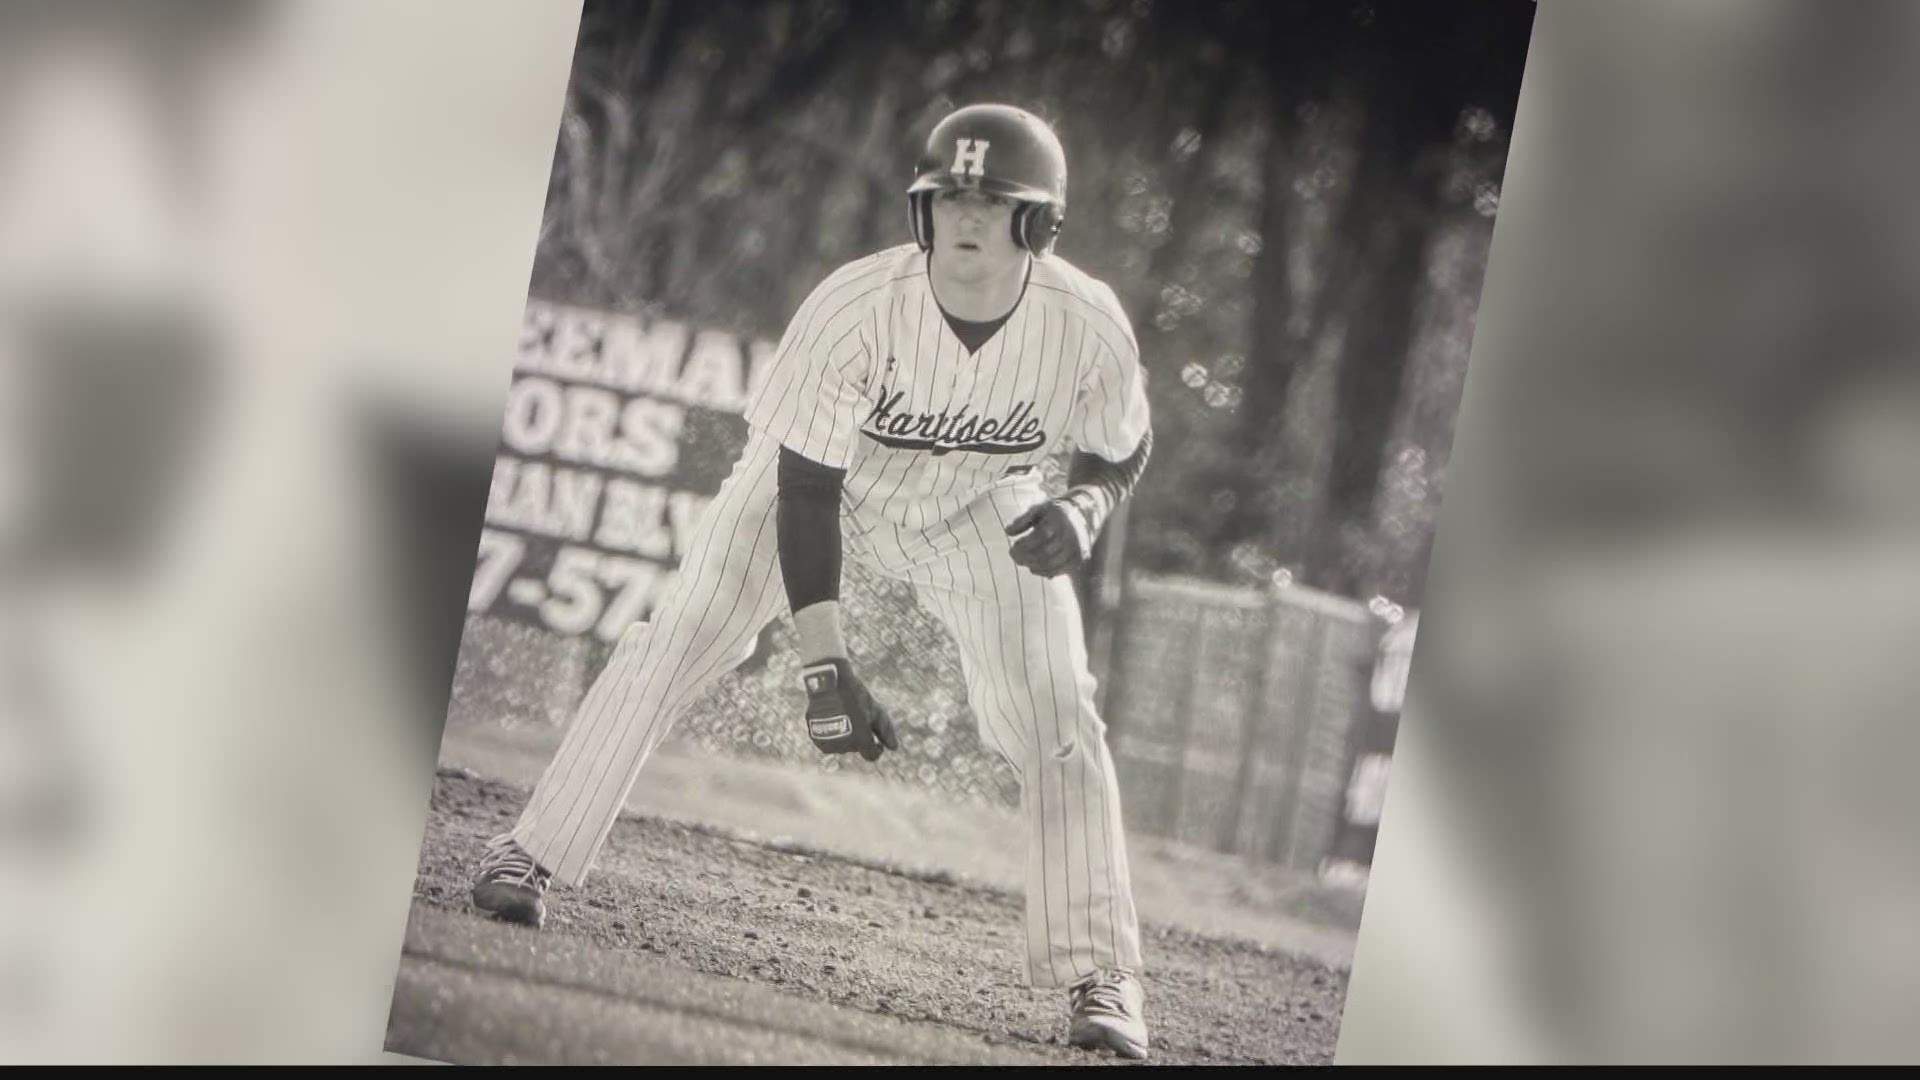 Hartselle High School senior reflects on the impact baseball has made in his life.